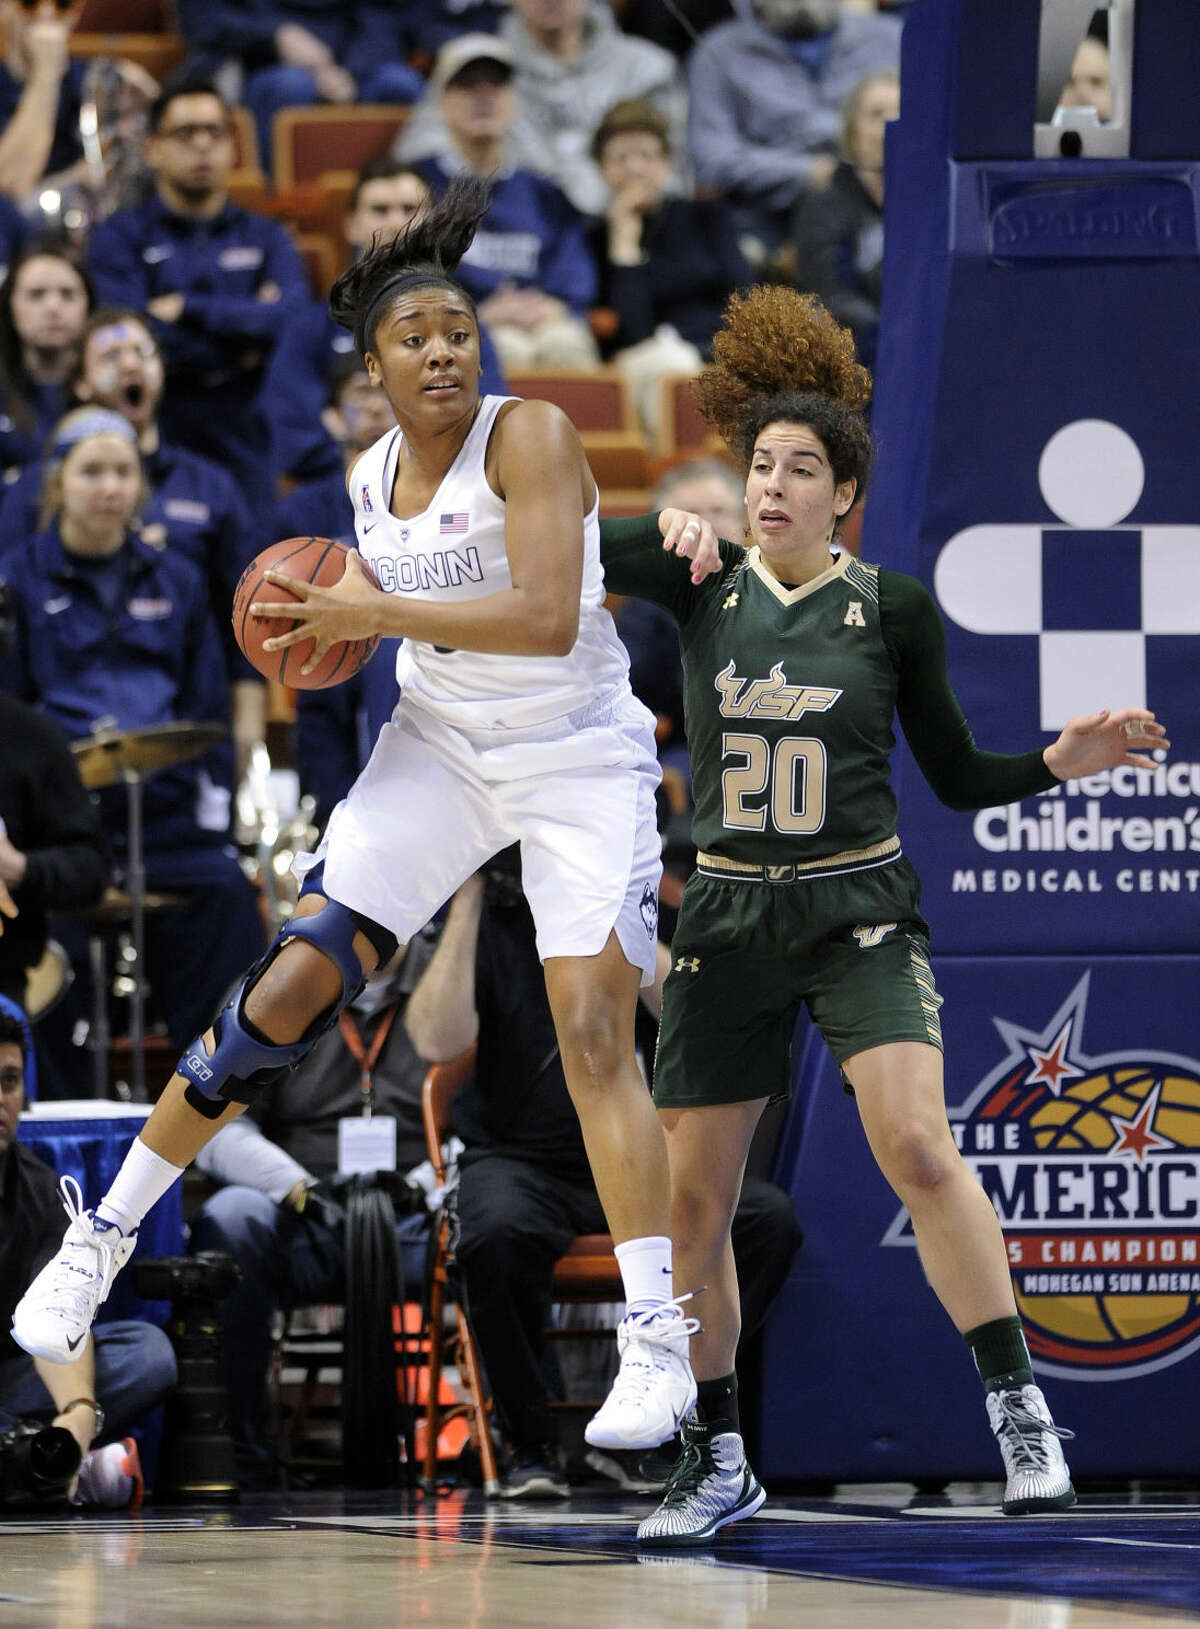 Connecticut's Morgan Tuck grabs a rebound from USF's Laura Ferreira (20) during the first half of an NCAA college basketball game in the finals of the American Athletic Conference tournament in Uncasville, Conn., on Monday, March 9, 2015. (AP Photo/Fred Beckham)